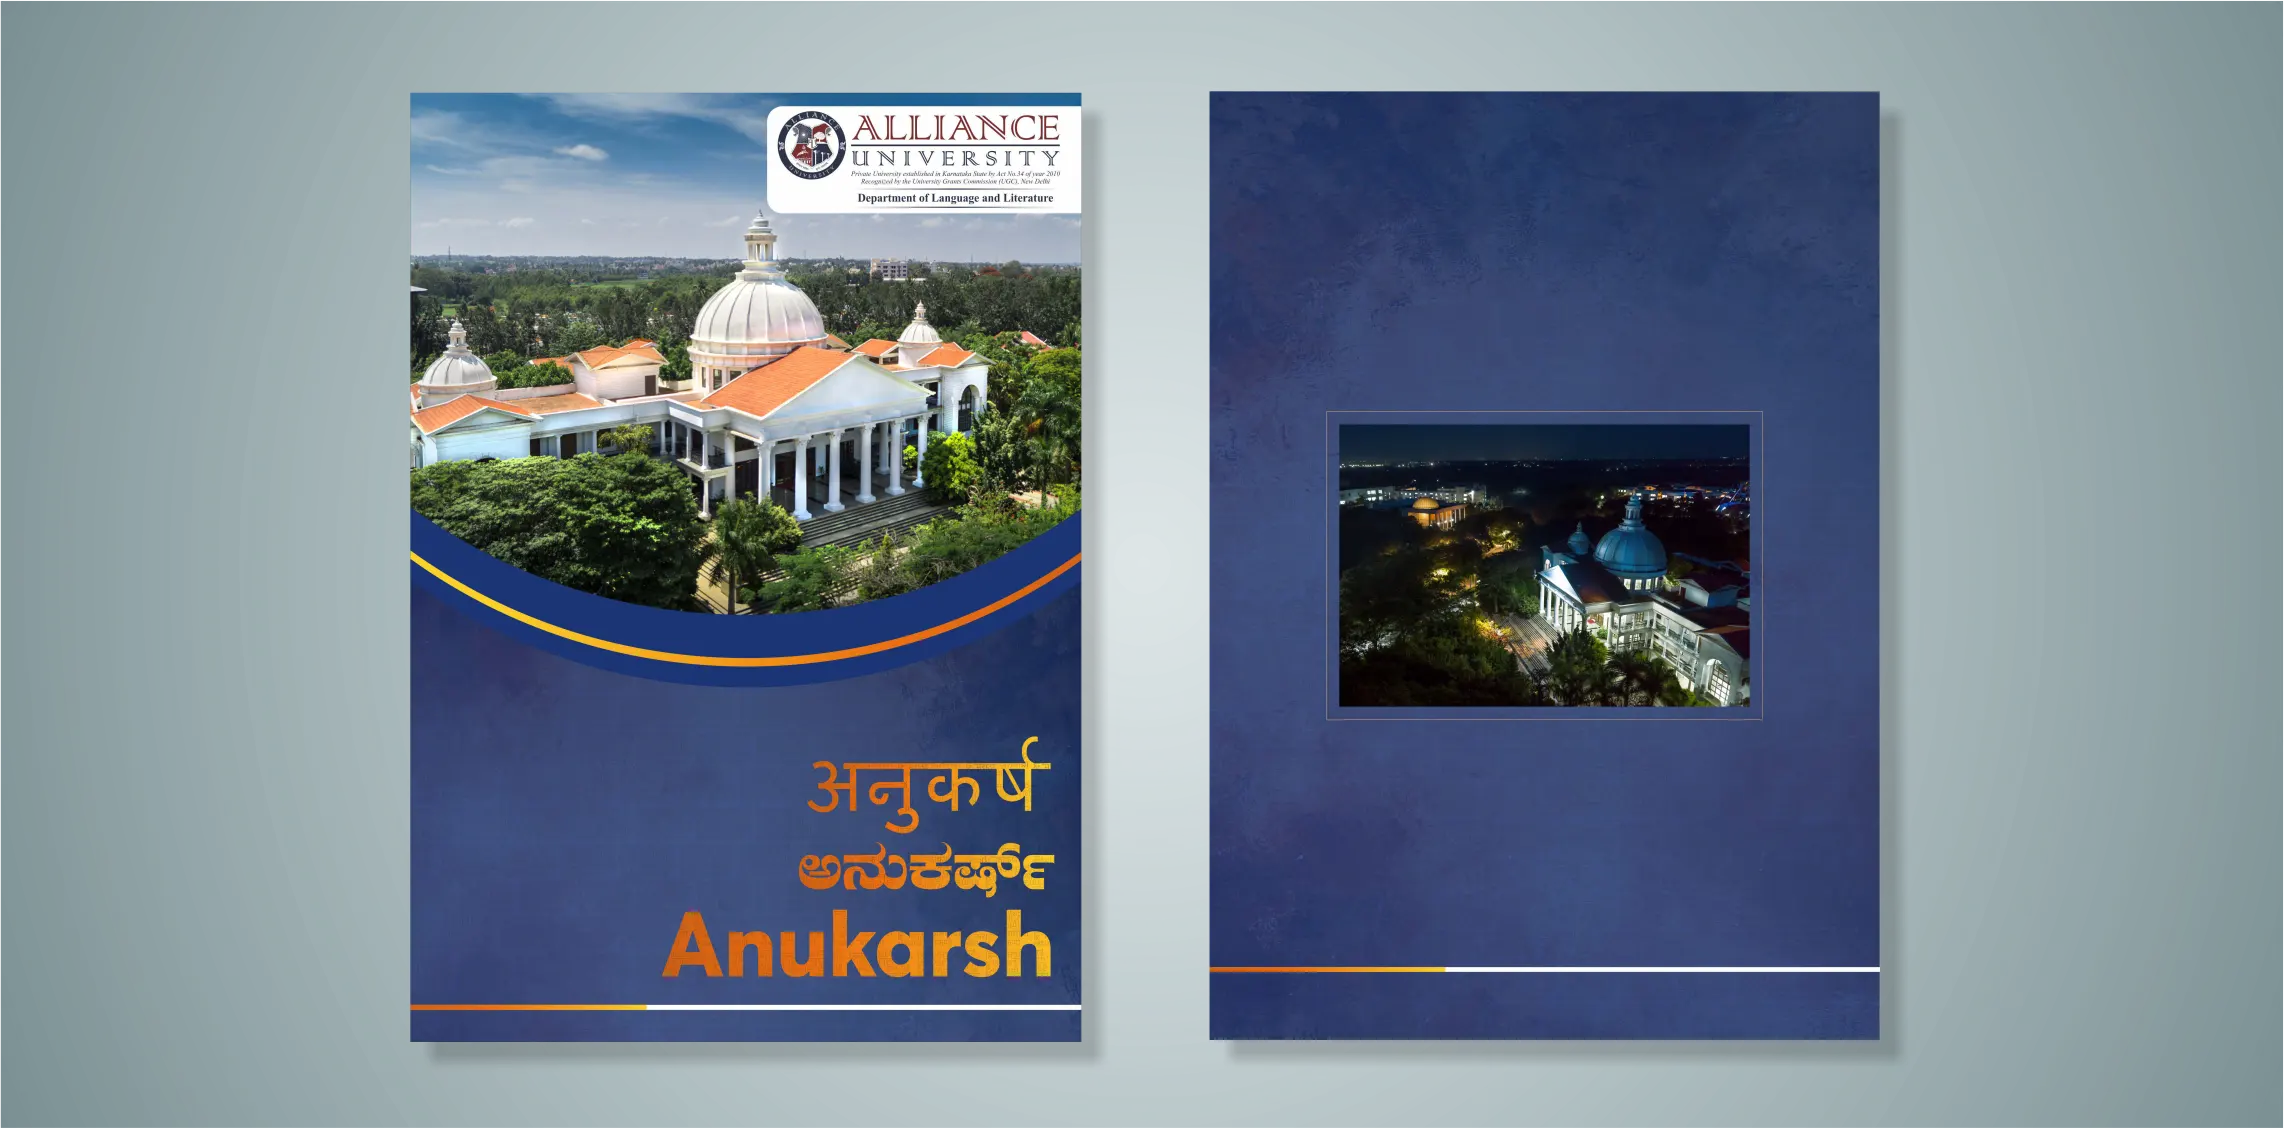 About the Anukarsh